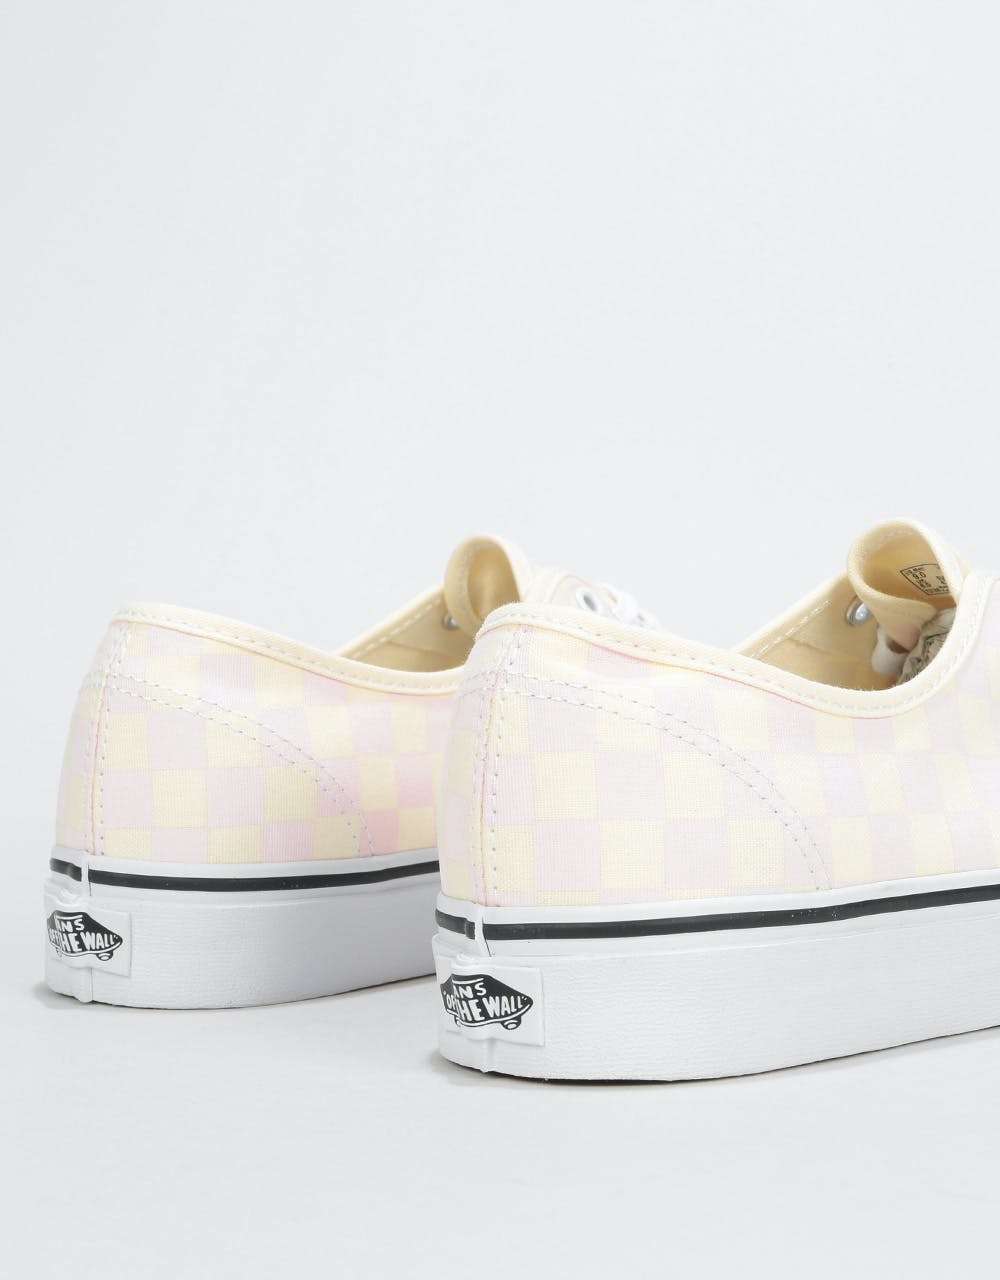 Vans Authentic Skate Shoes - (Checkerboard) Chalk Pink/Classic White